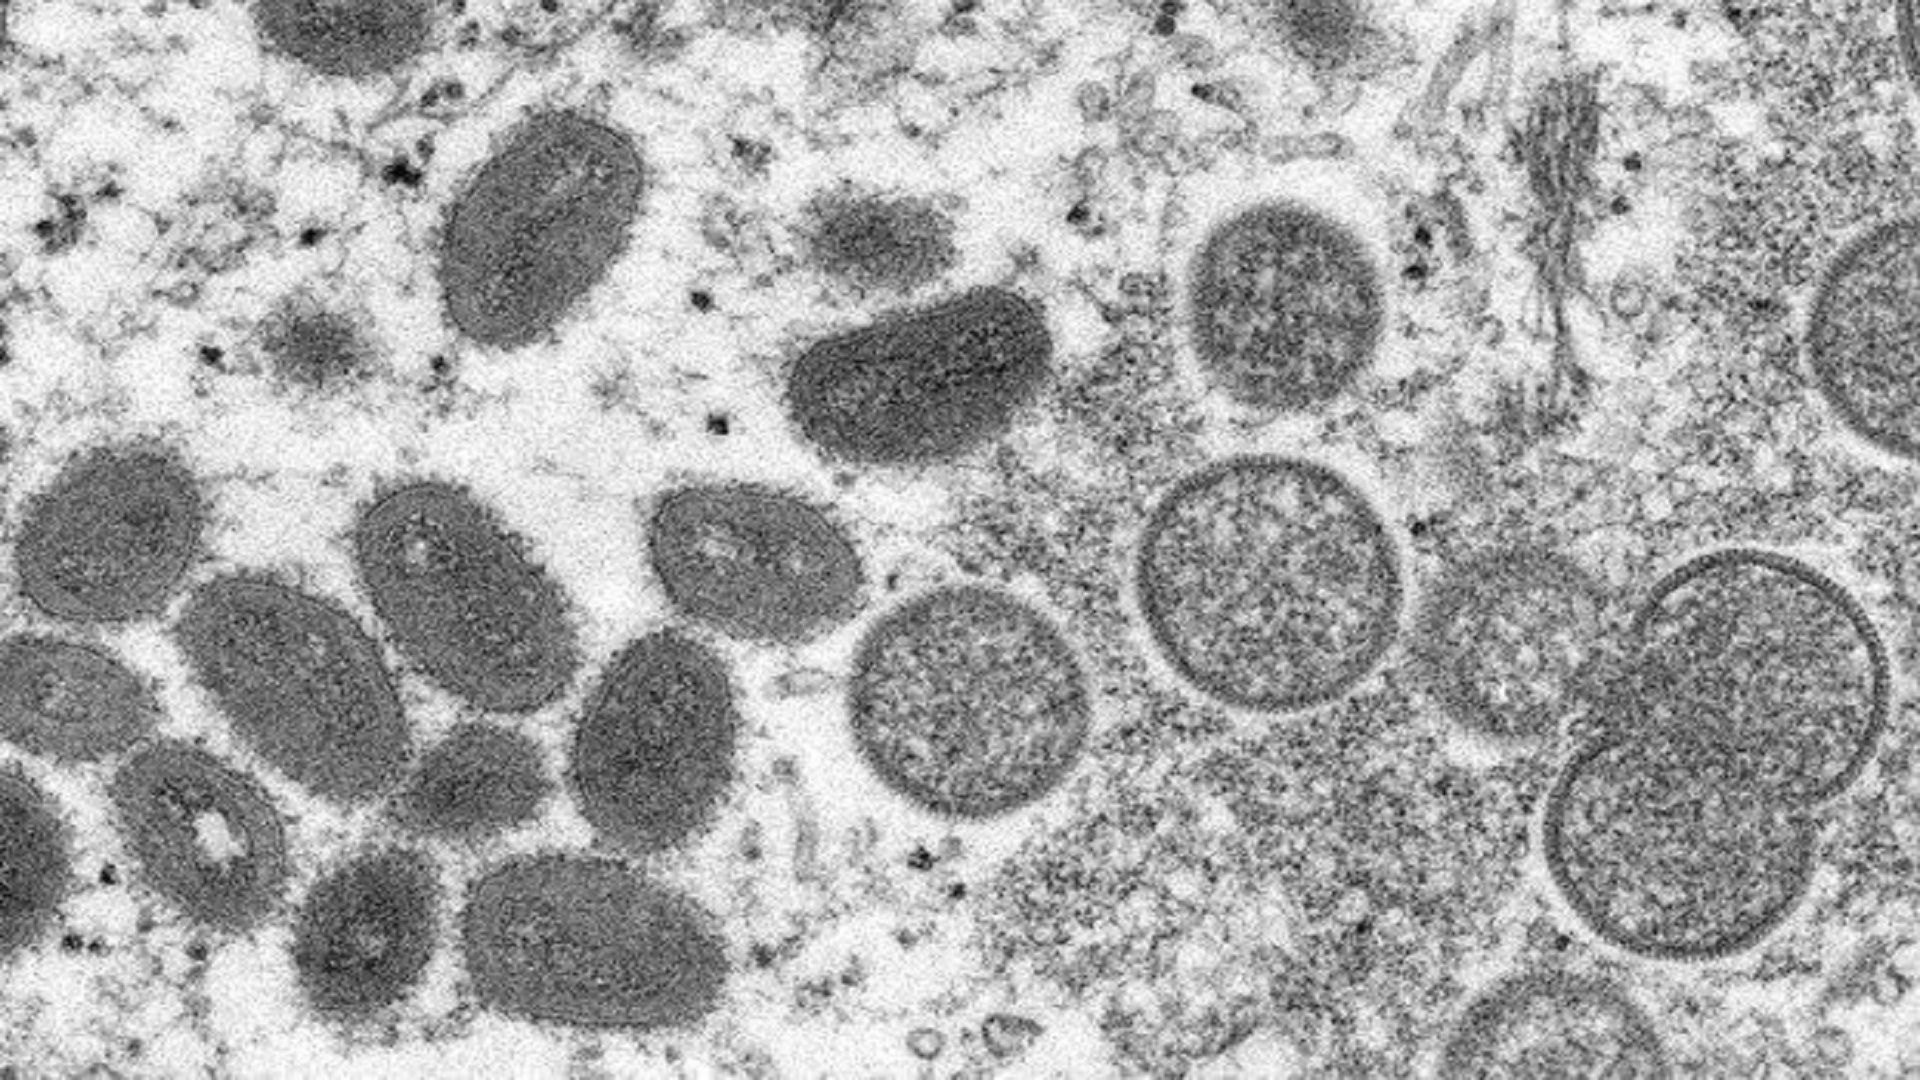 An electron microscope image showing mature, oval-shaped monkeypox virions (left) and spherical immature virions from a 2003 US outbreak. Photograph: AP